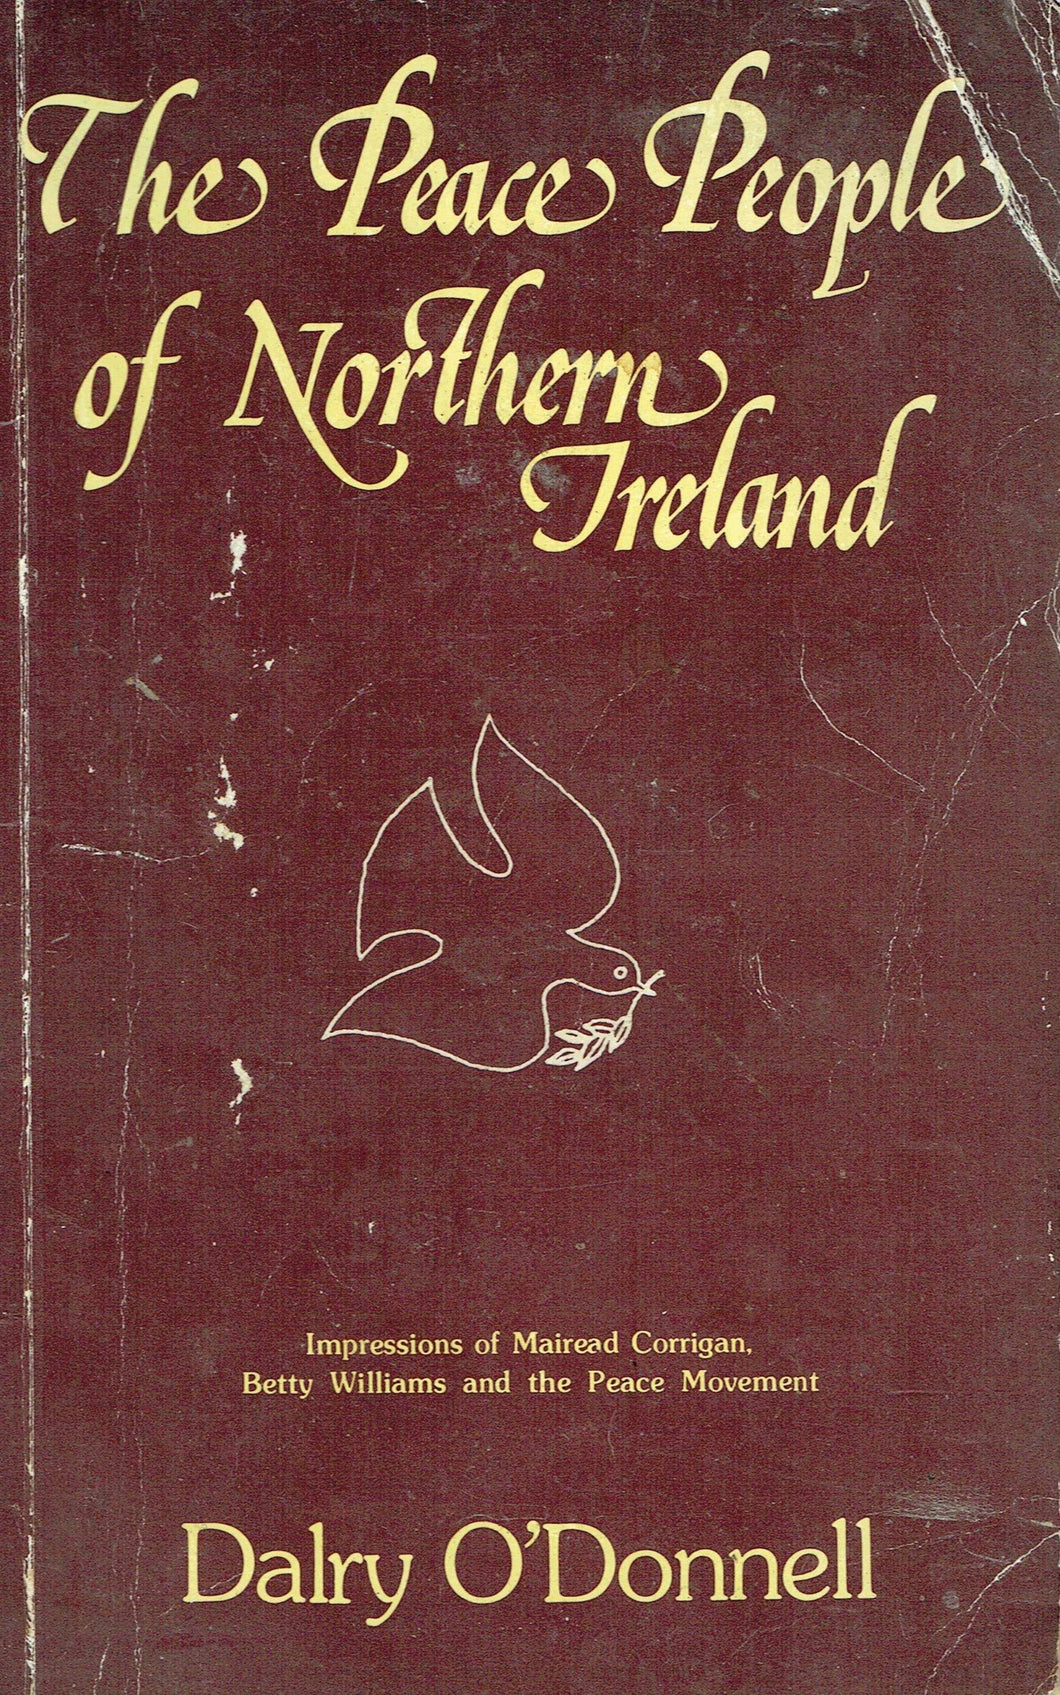 The Peace People of Northern Ireland